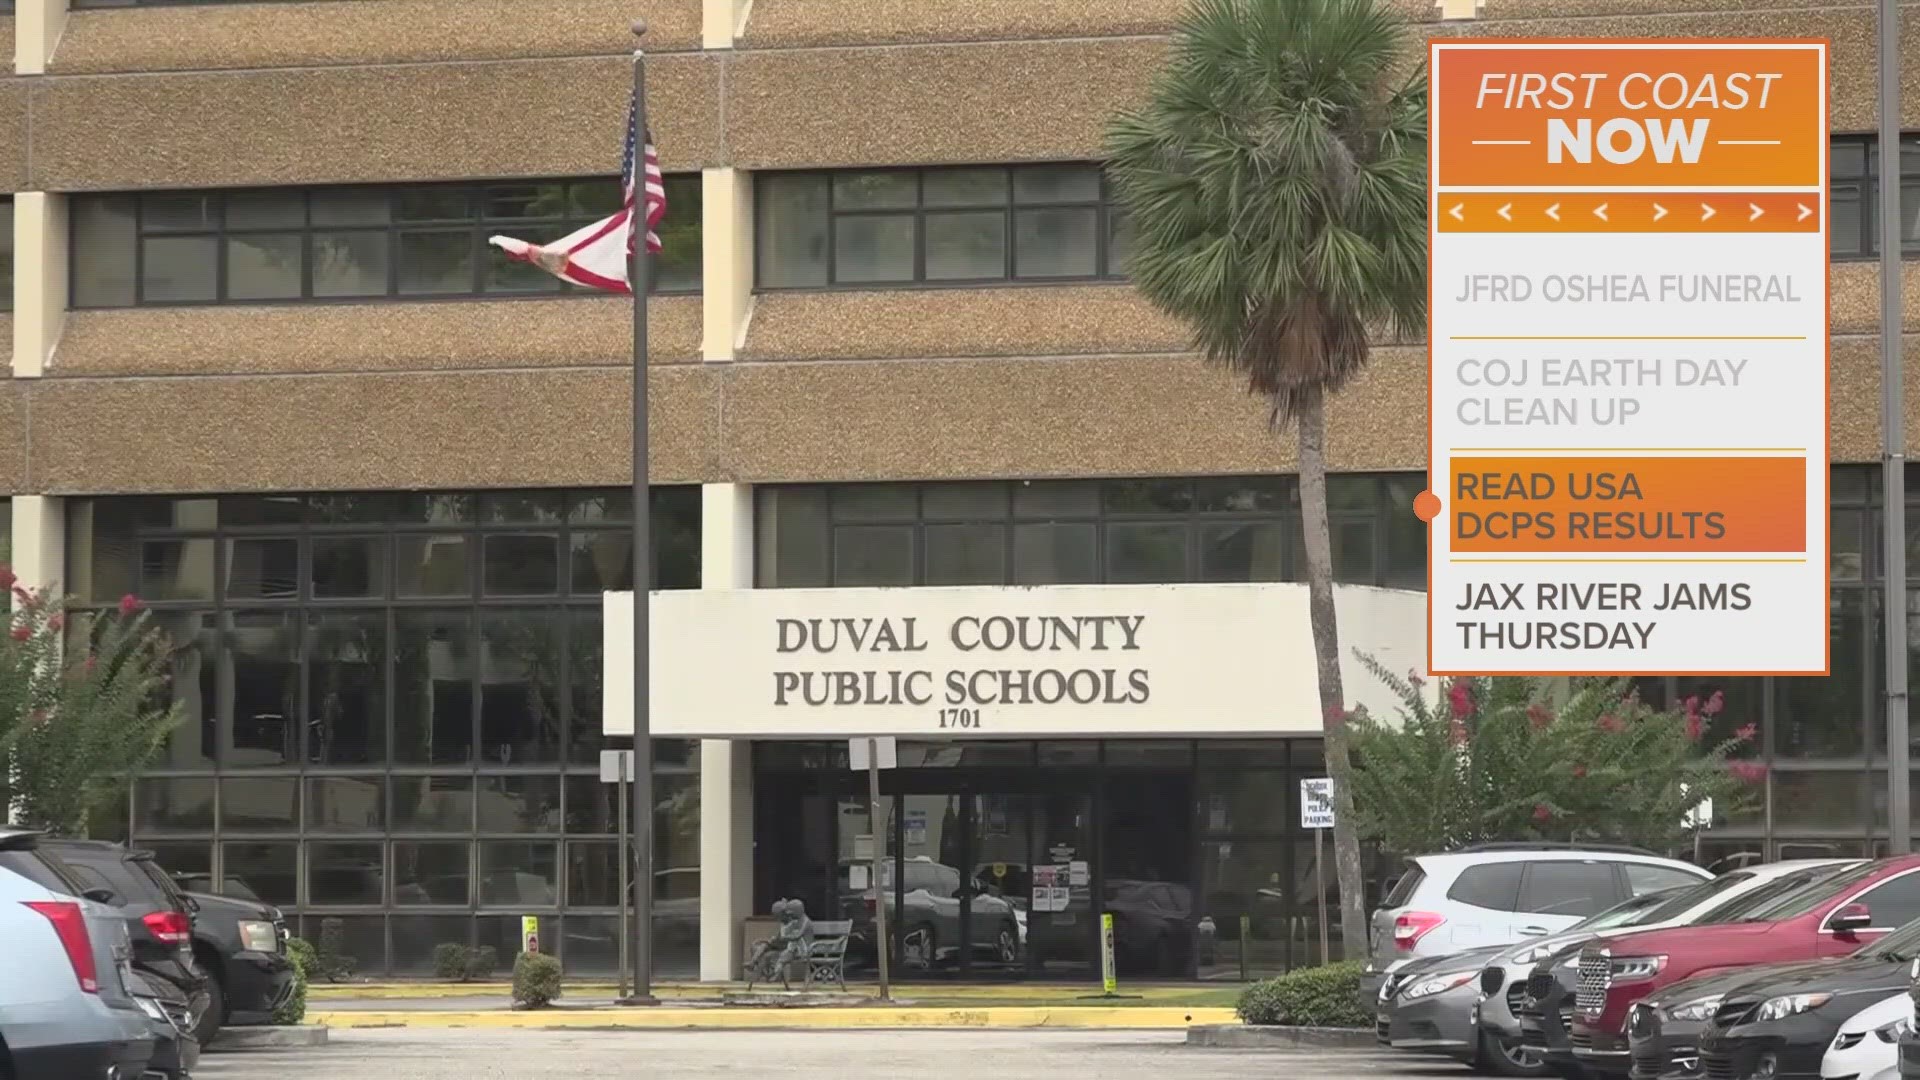 Results will be announced in a 10 a.m. press conference held at the Duval County Public Schools headquarters.